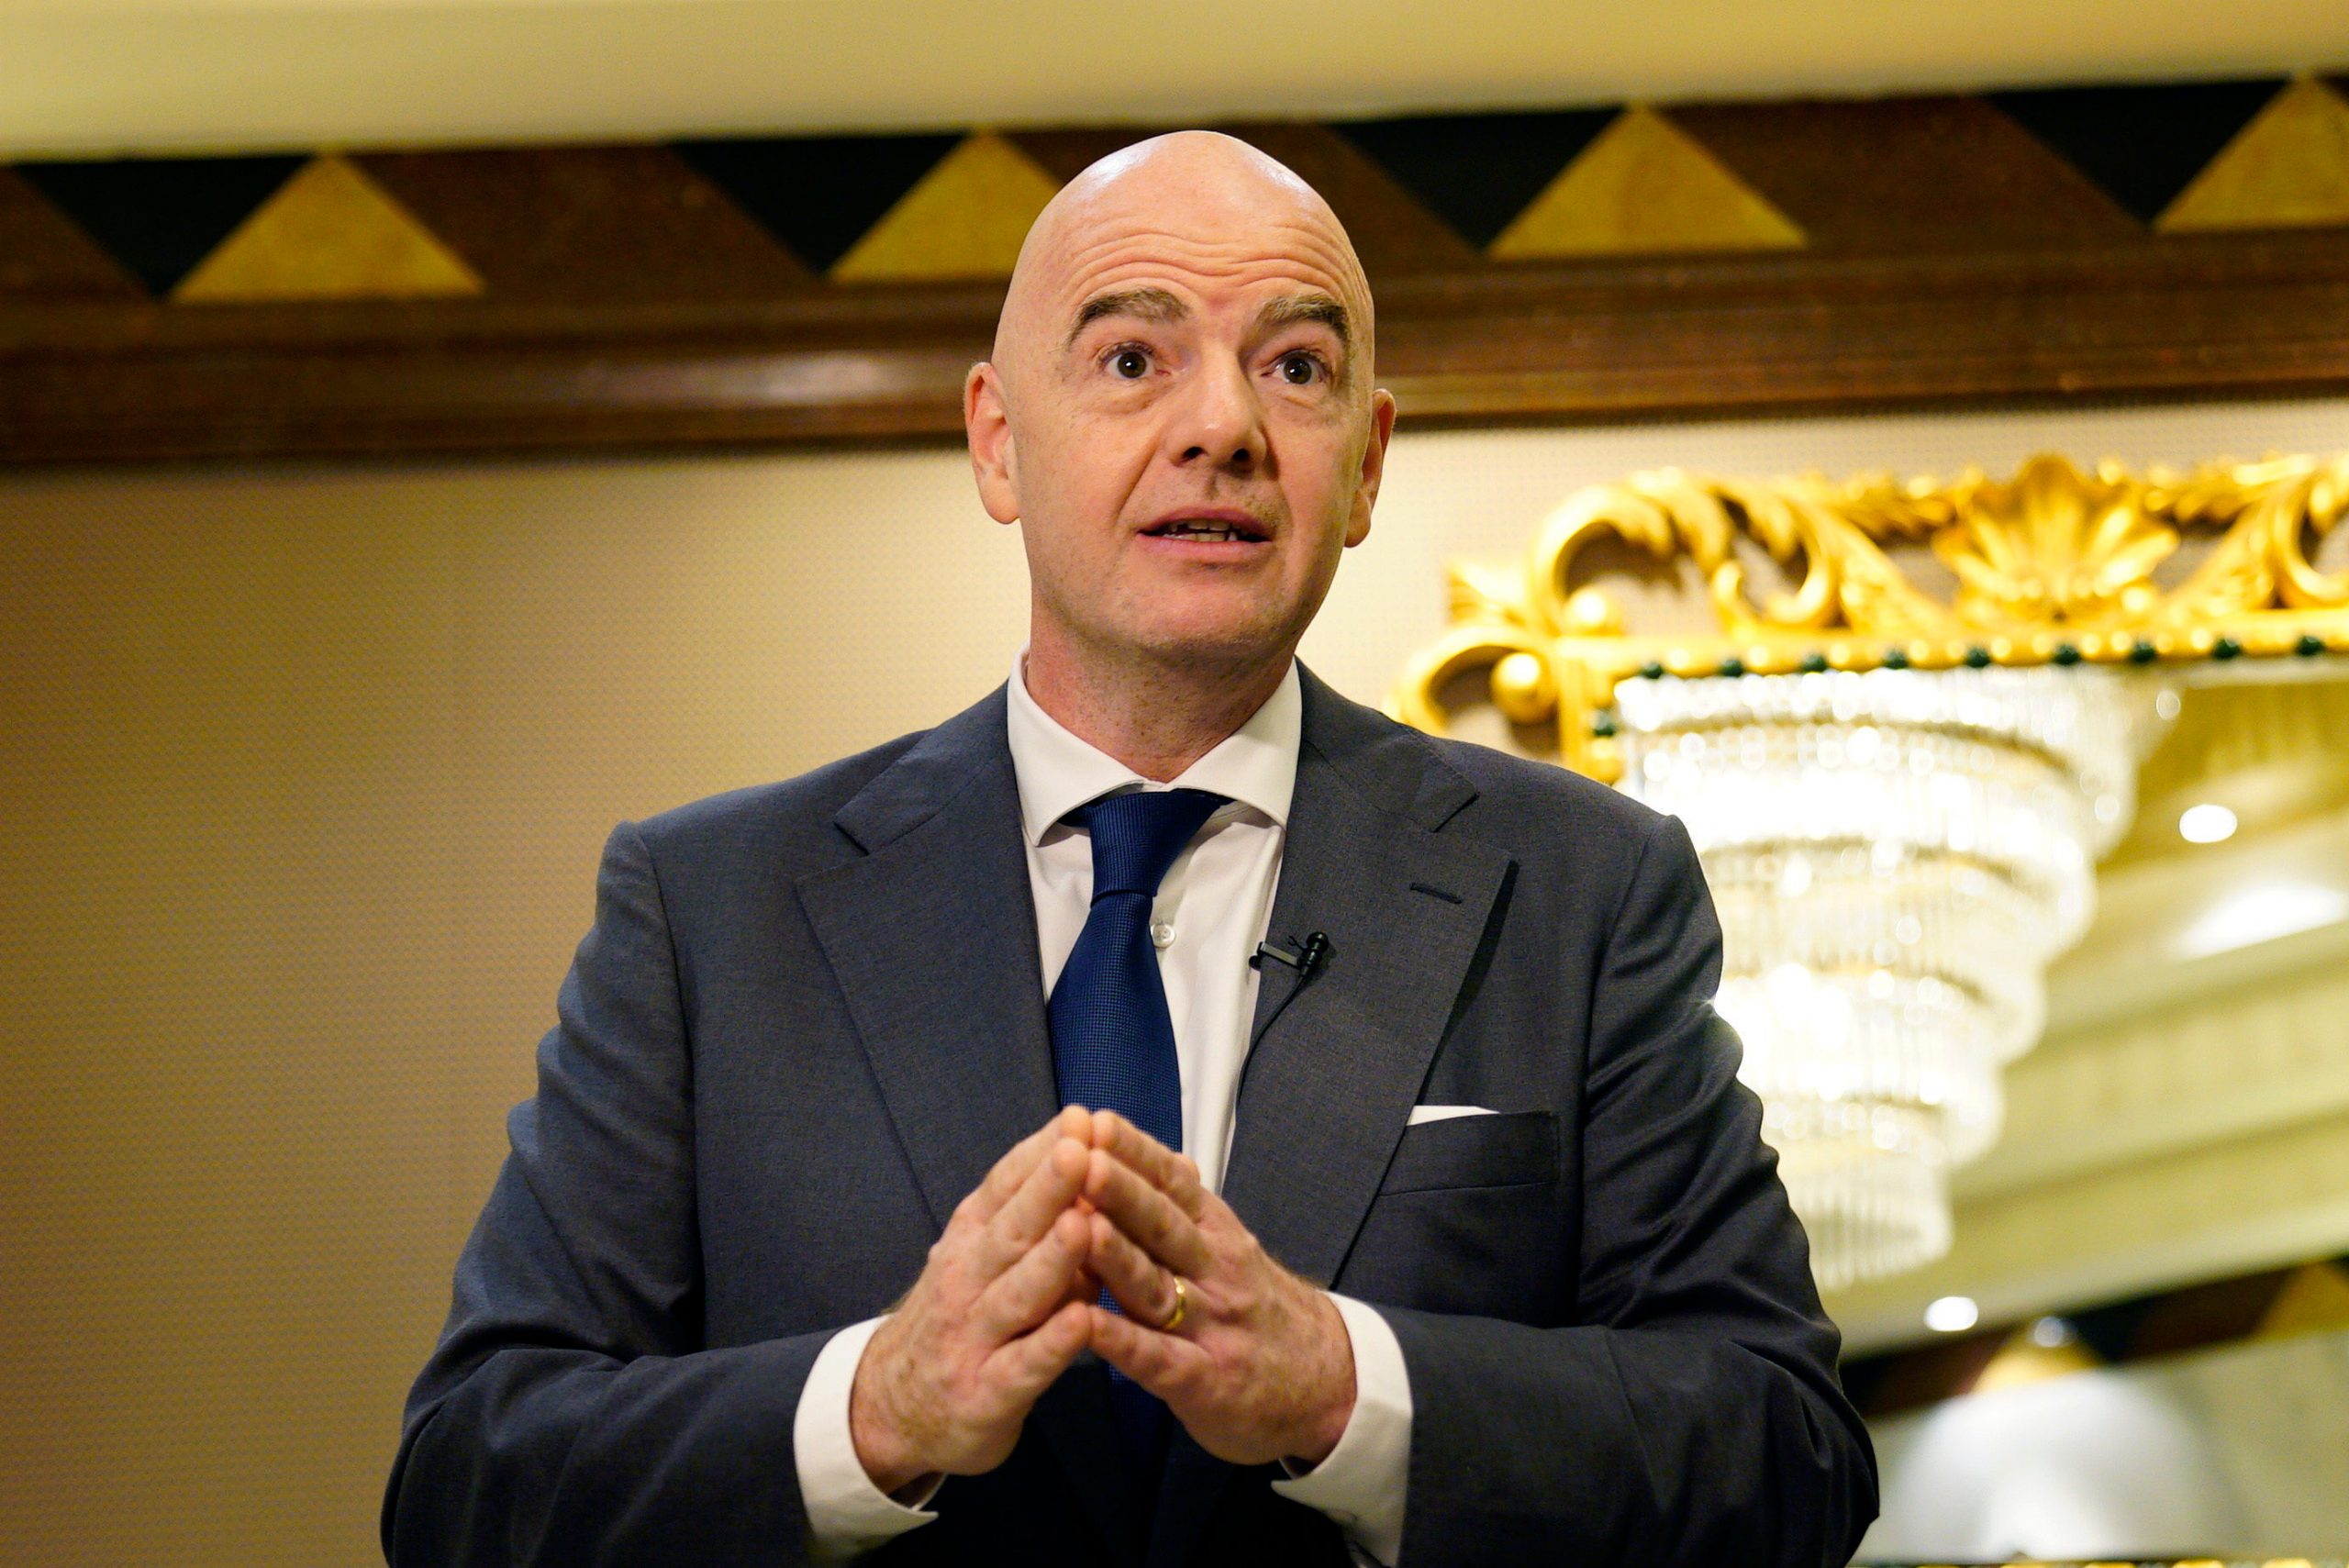 FIFA president Gianni Infantino on alcohol ban at World Cup: Fans should be able to abstain